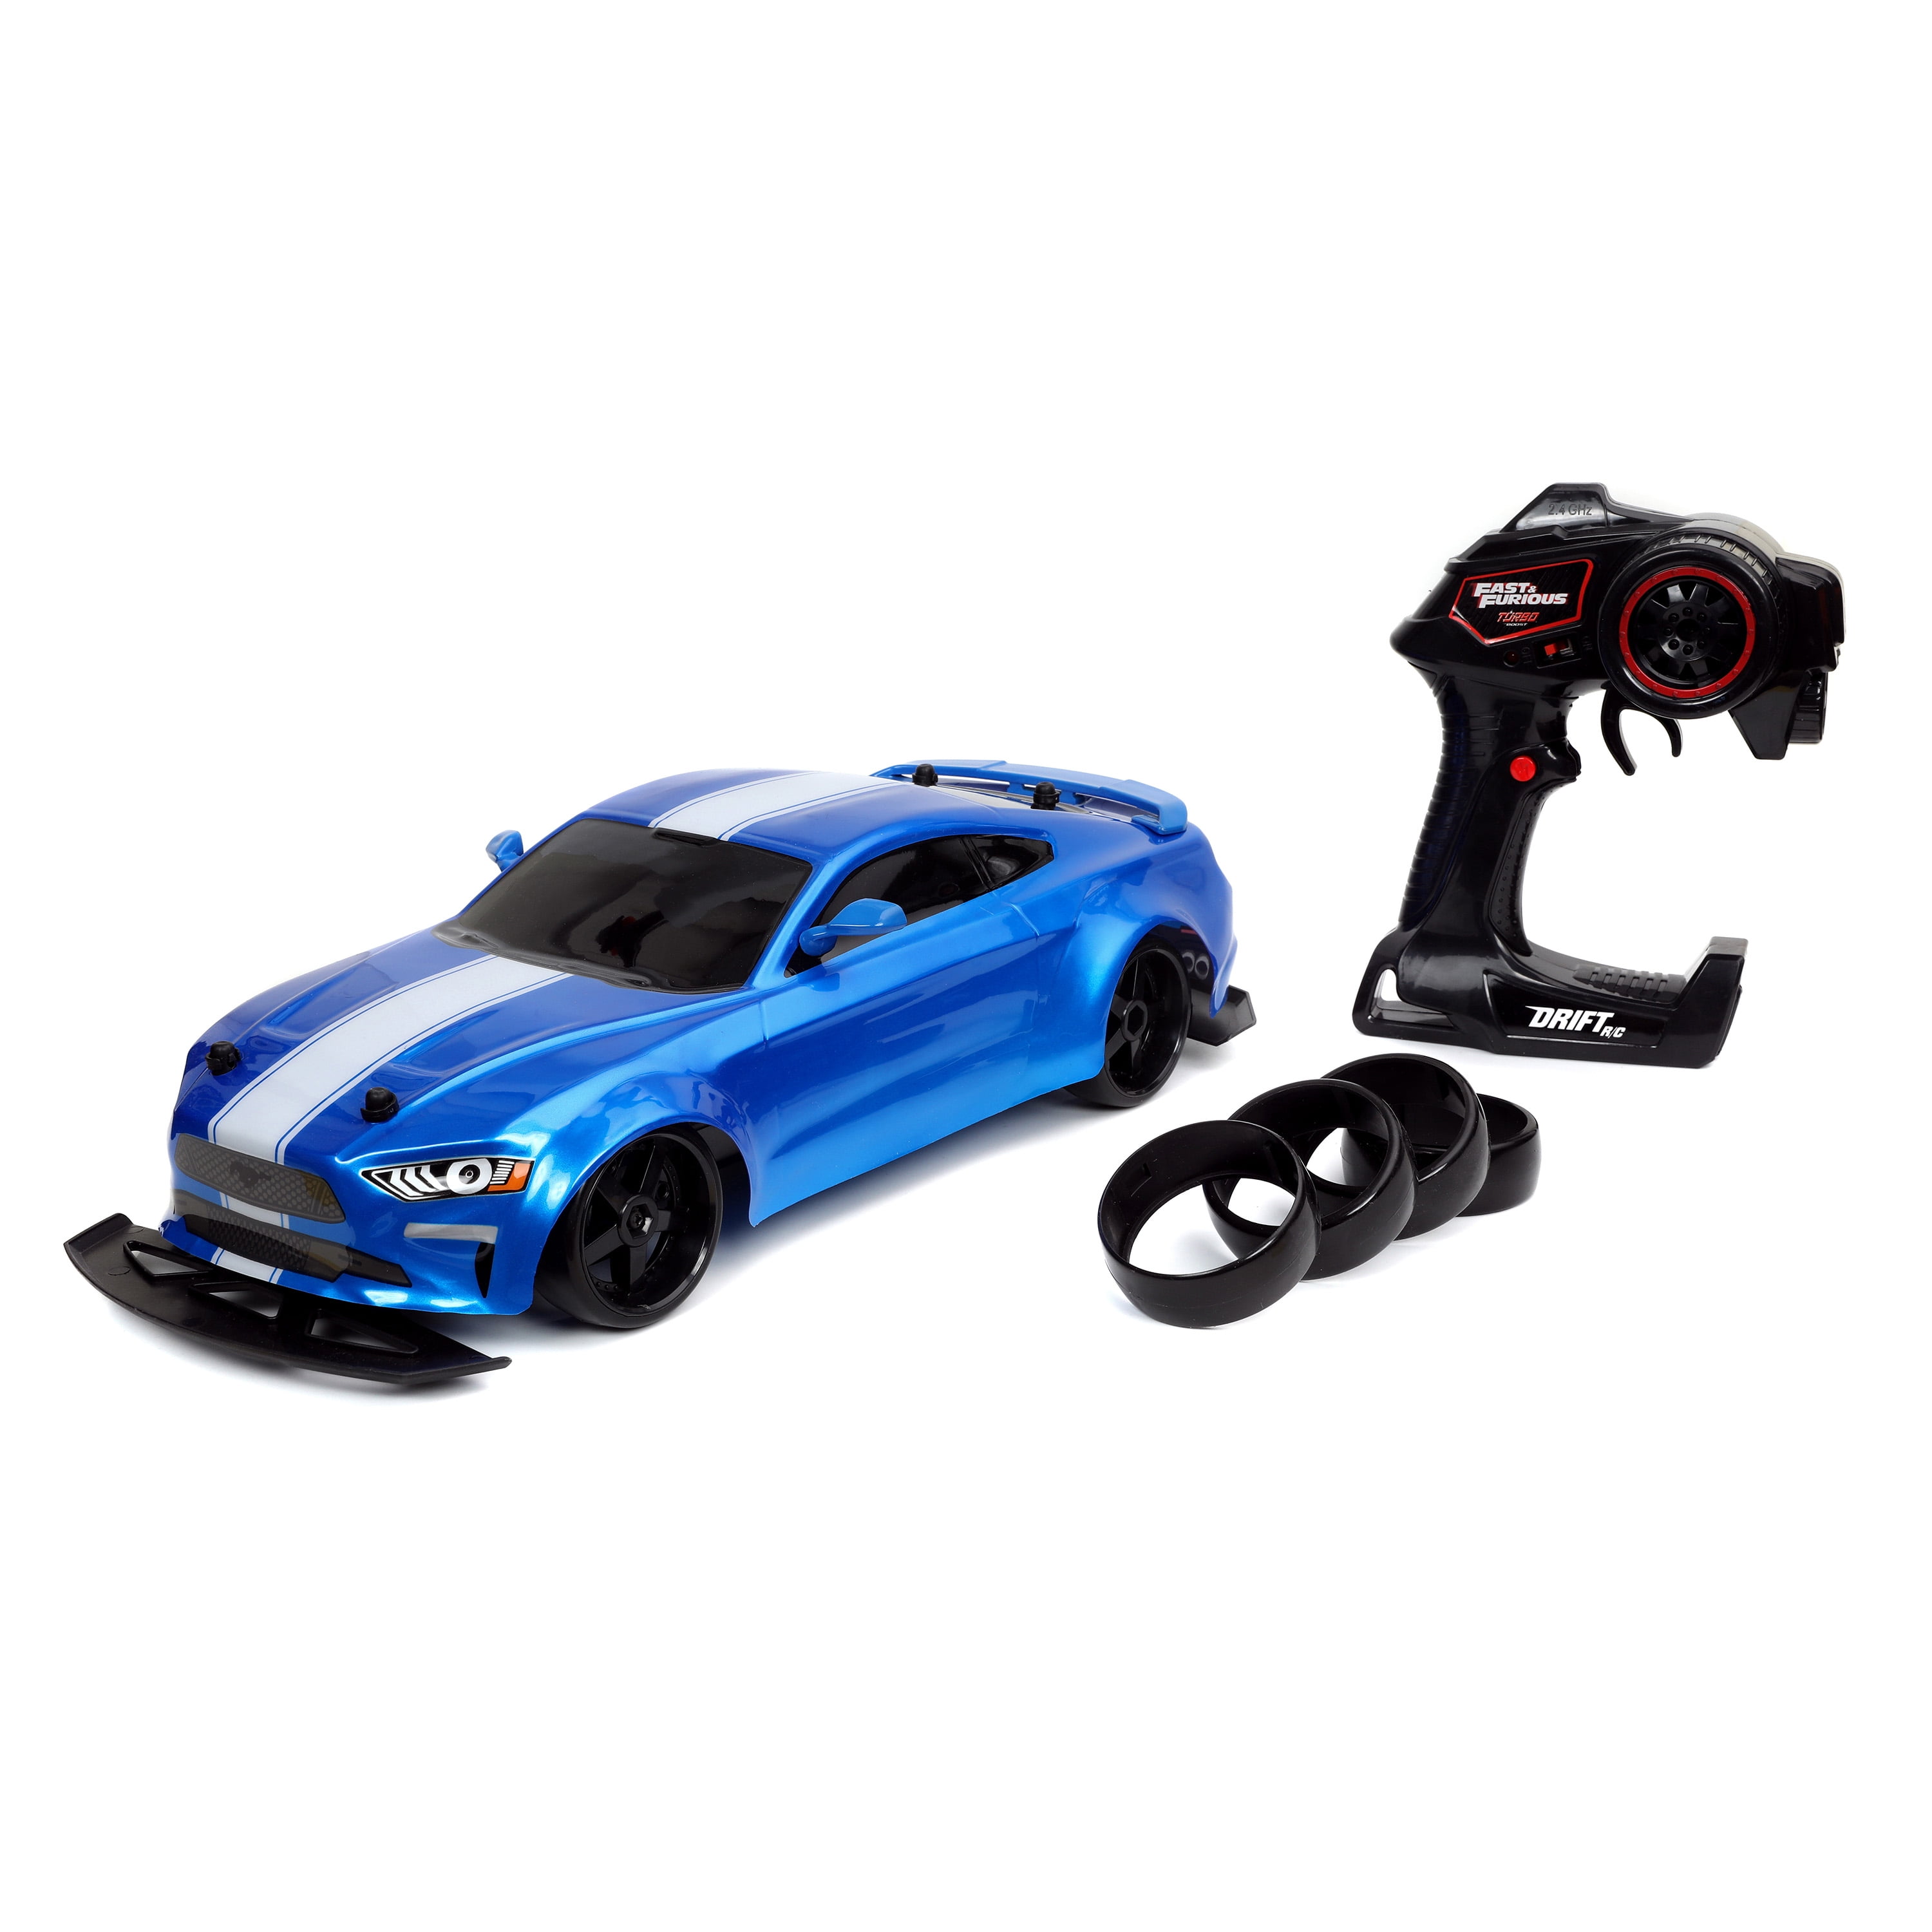 Juguete Caterpillar Street Cars Ford State Mustang GT con Control Remoto 